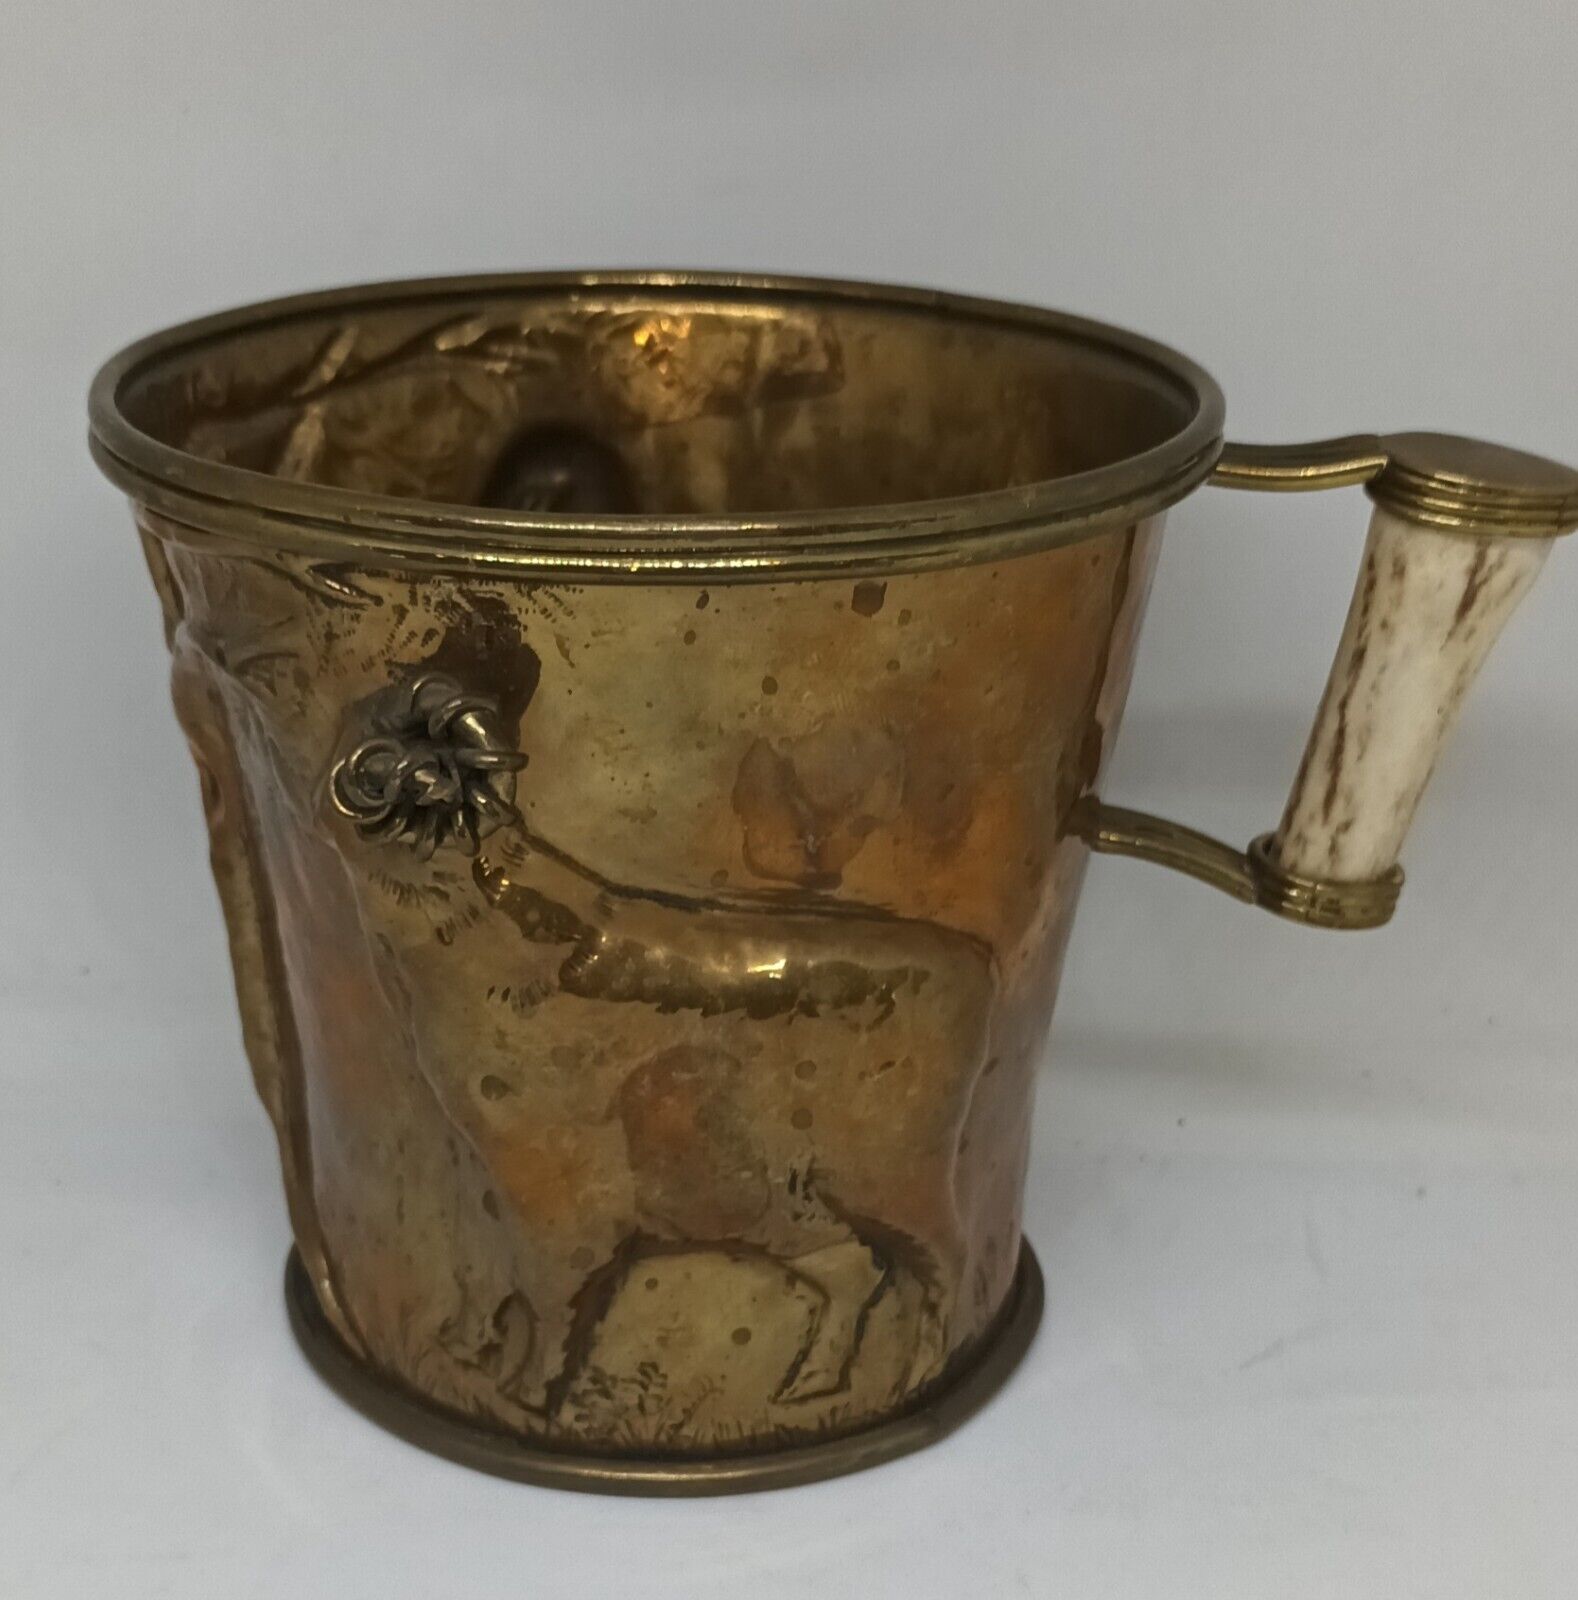 Large bronze jug worked with images of animals. Measures 14cm x 14cm